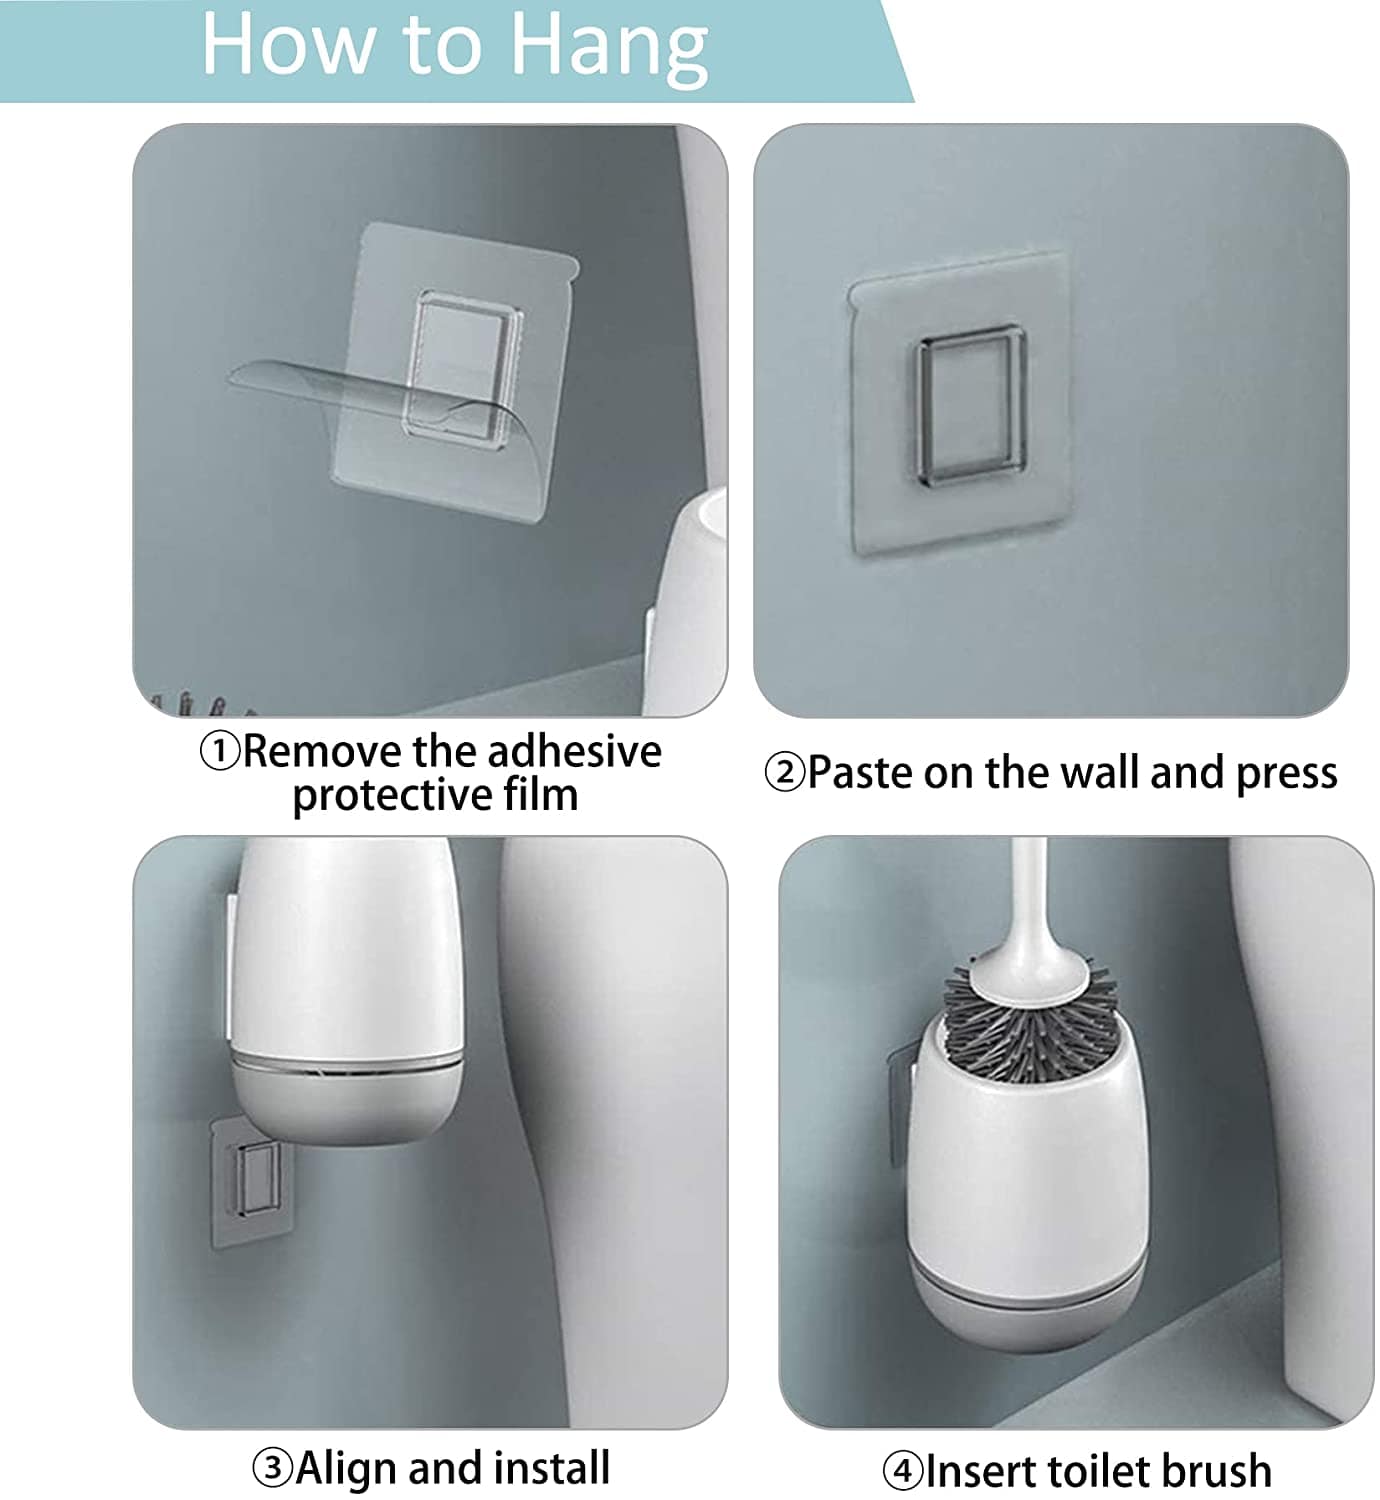 Hibbent 马桶刷/马桶刷架 Hibbent Silicone Toilet Brush with Ventilated Drying Holder Floor Standing & Wall Mounted Without Drilling